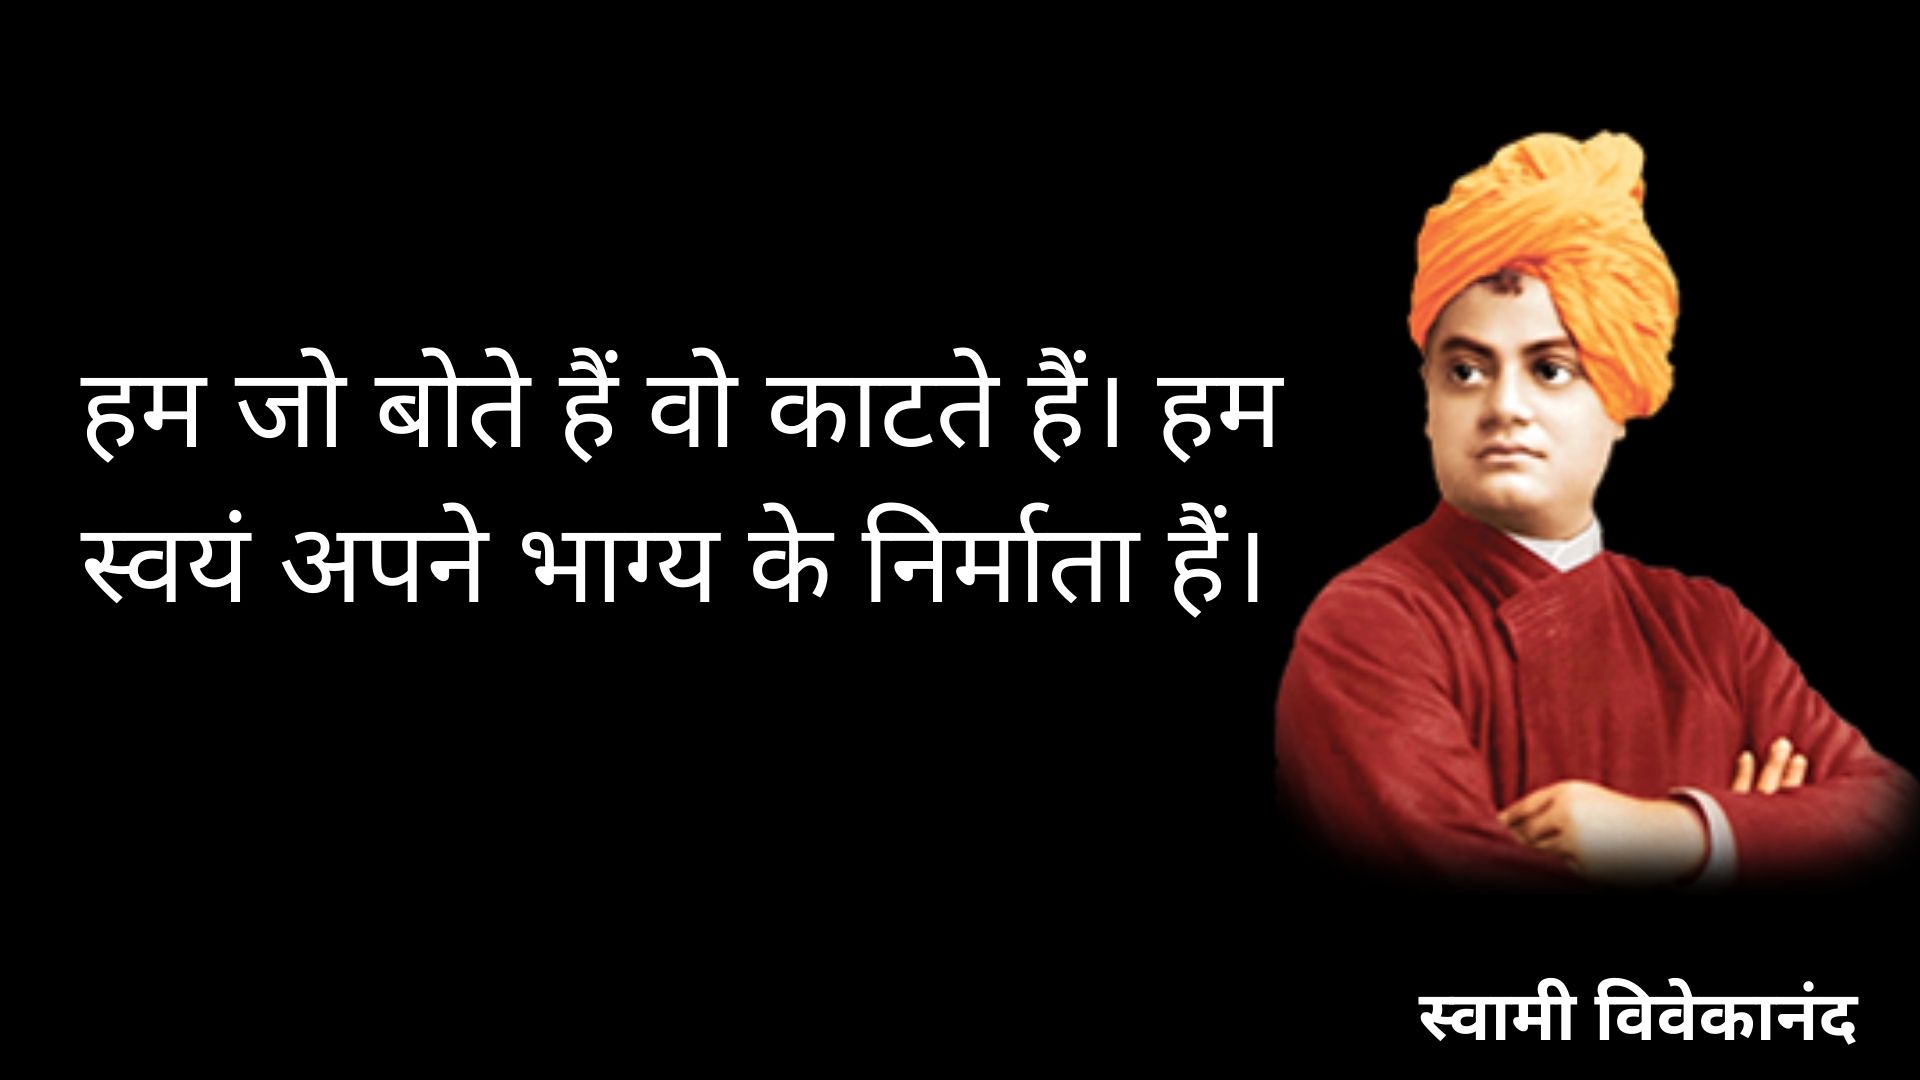 swami vivekananda quotes, swami vivekananda quotes in hindi, swami vivekananda quotes in english, quotes of swami vivekananda, swami vivekananda quotes for students